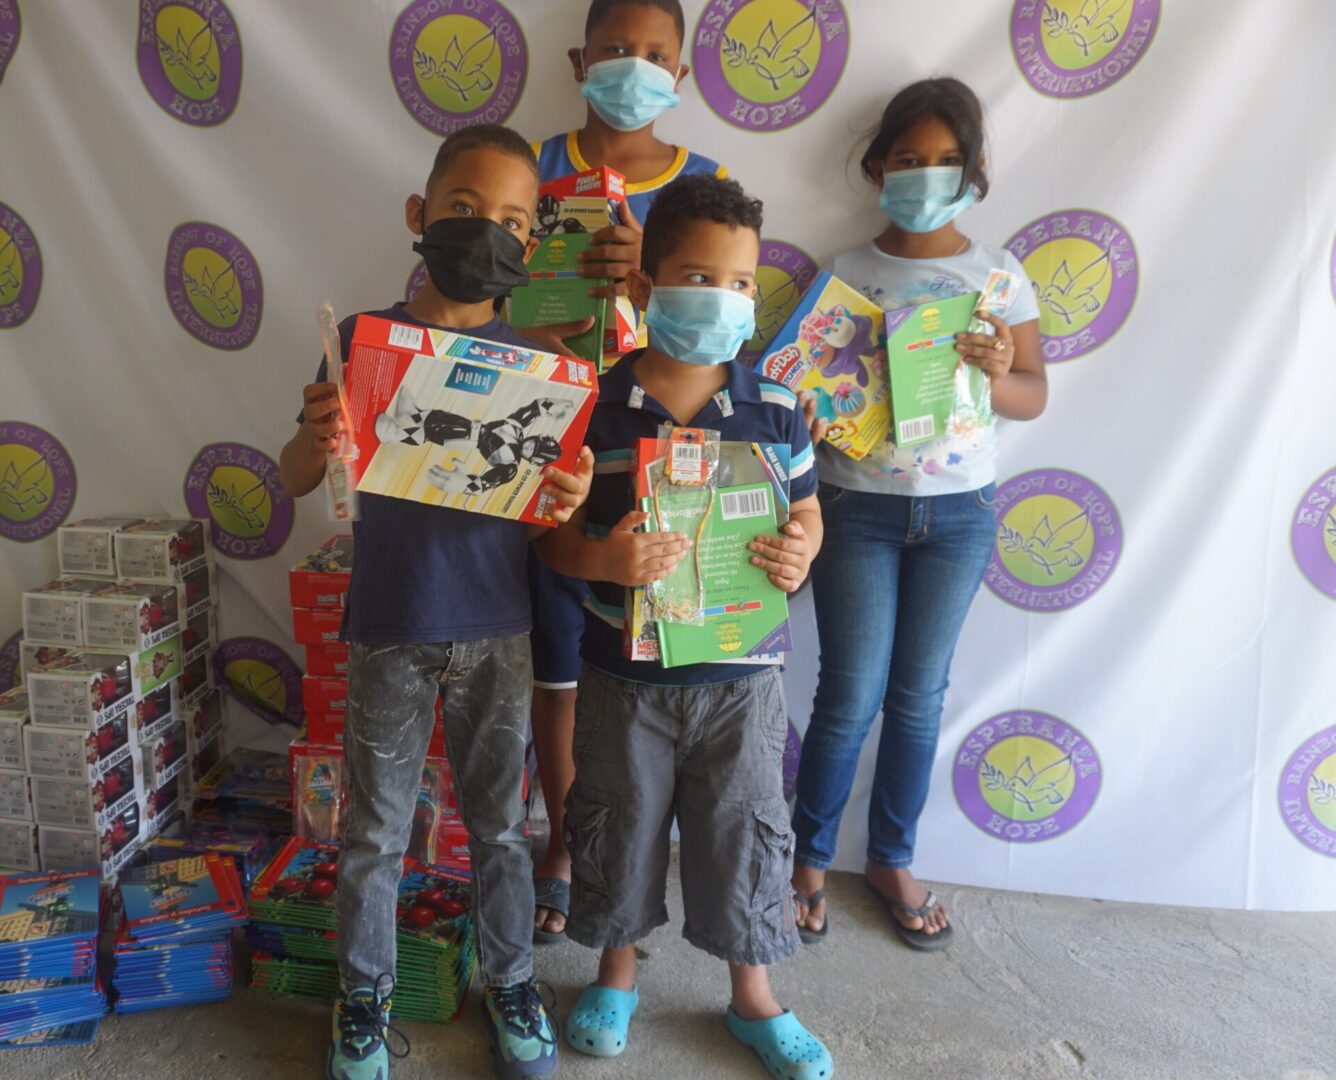 Four children standing against the Esperanza-Hope backdrop with their toys and books, batch 9